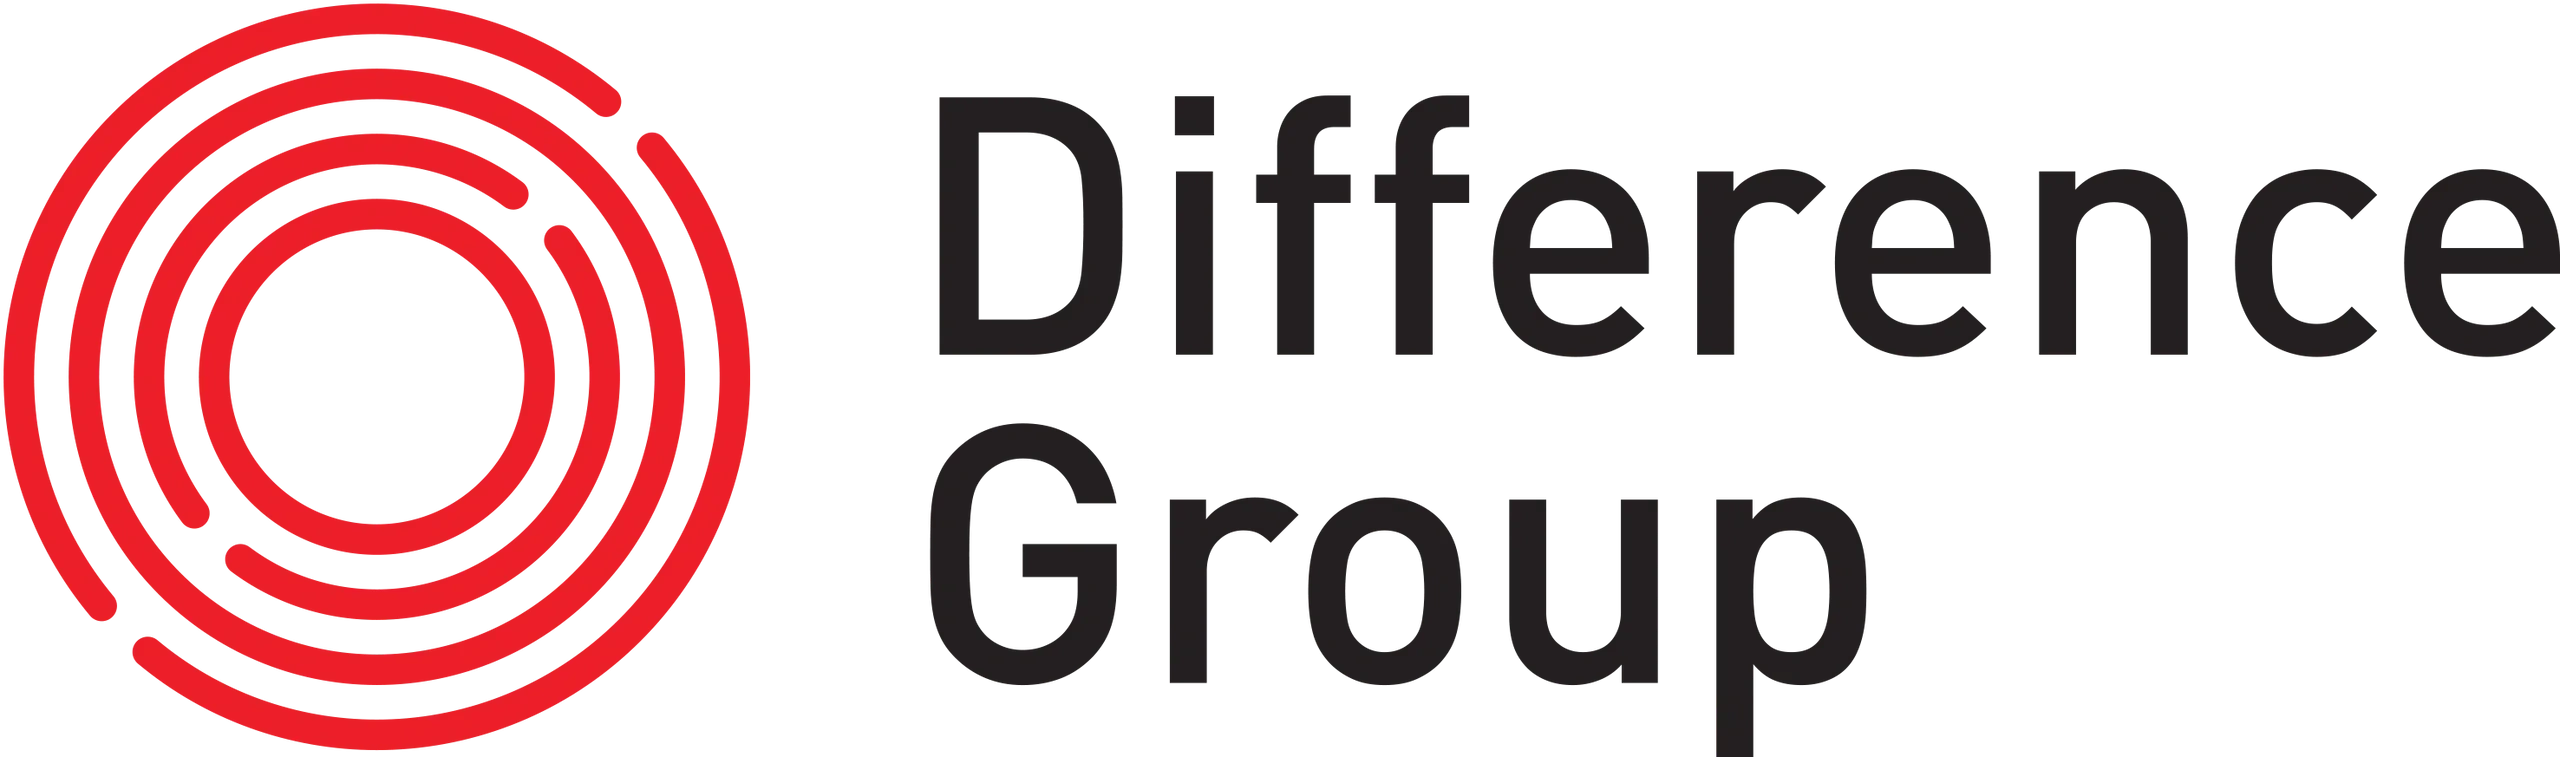 Difference Group Logo